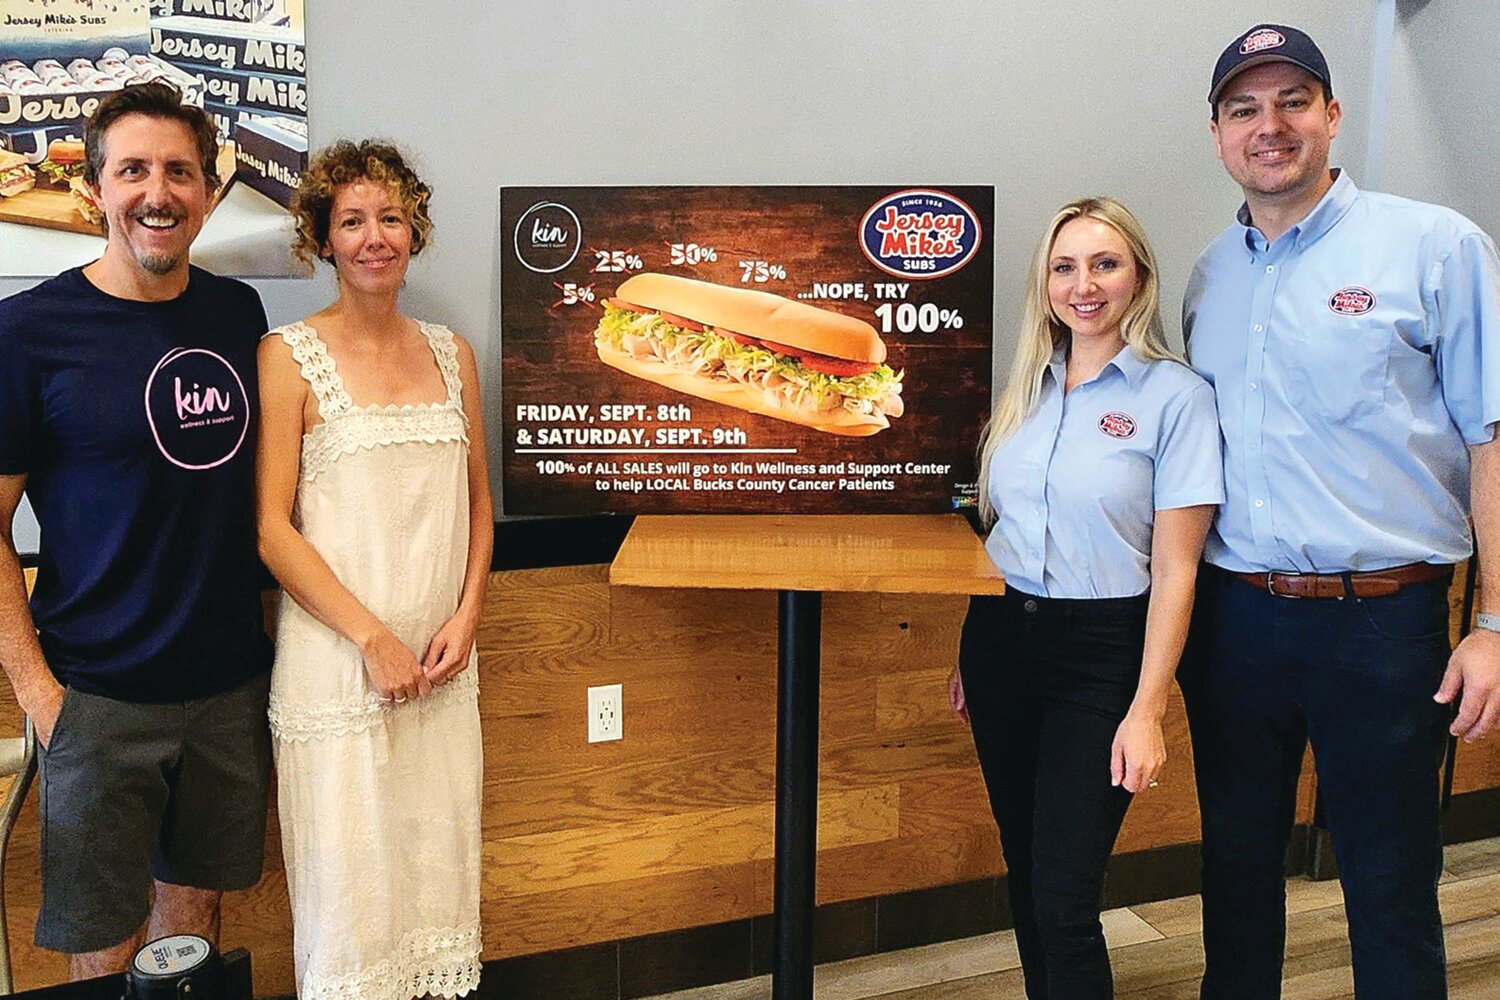 From left are: Keith and Kristina Fenimore, Kin Wellness and Support Center, and Amanda Taibe and Jesse Allen, owners of Jersey Mike’s in Doylestown.